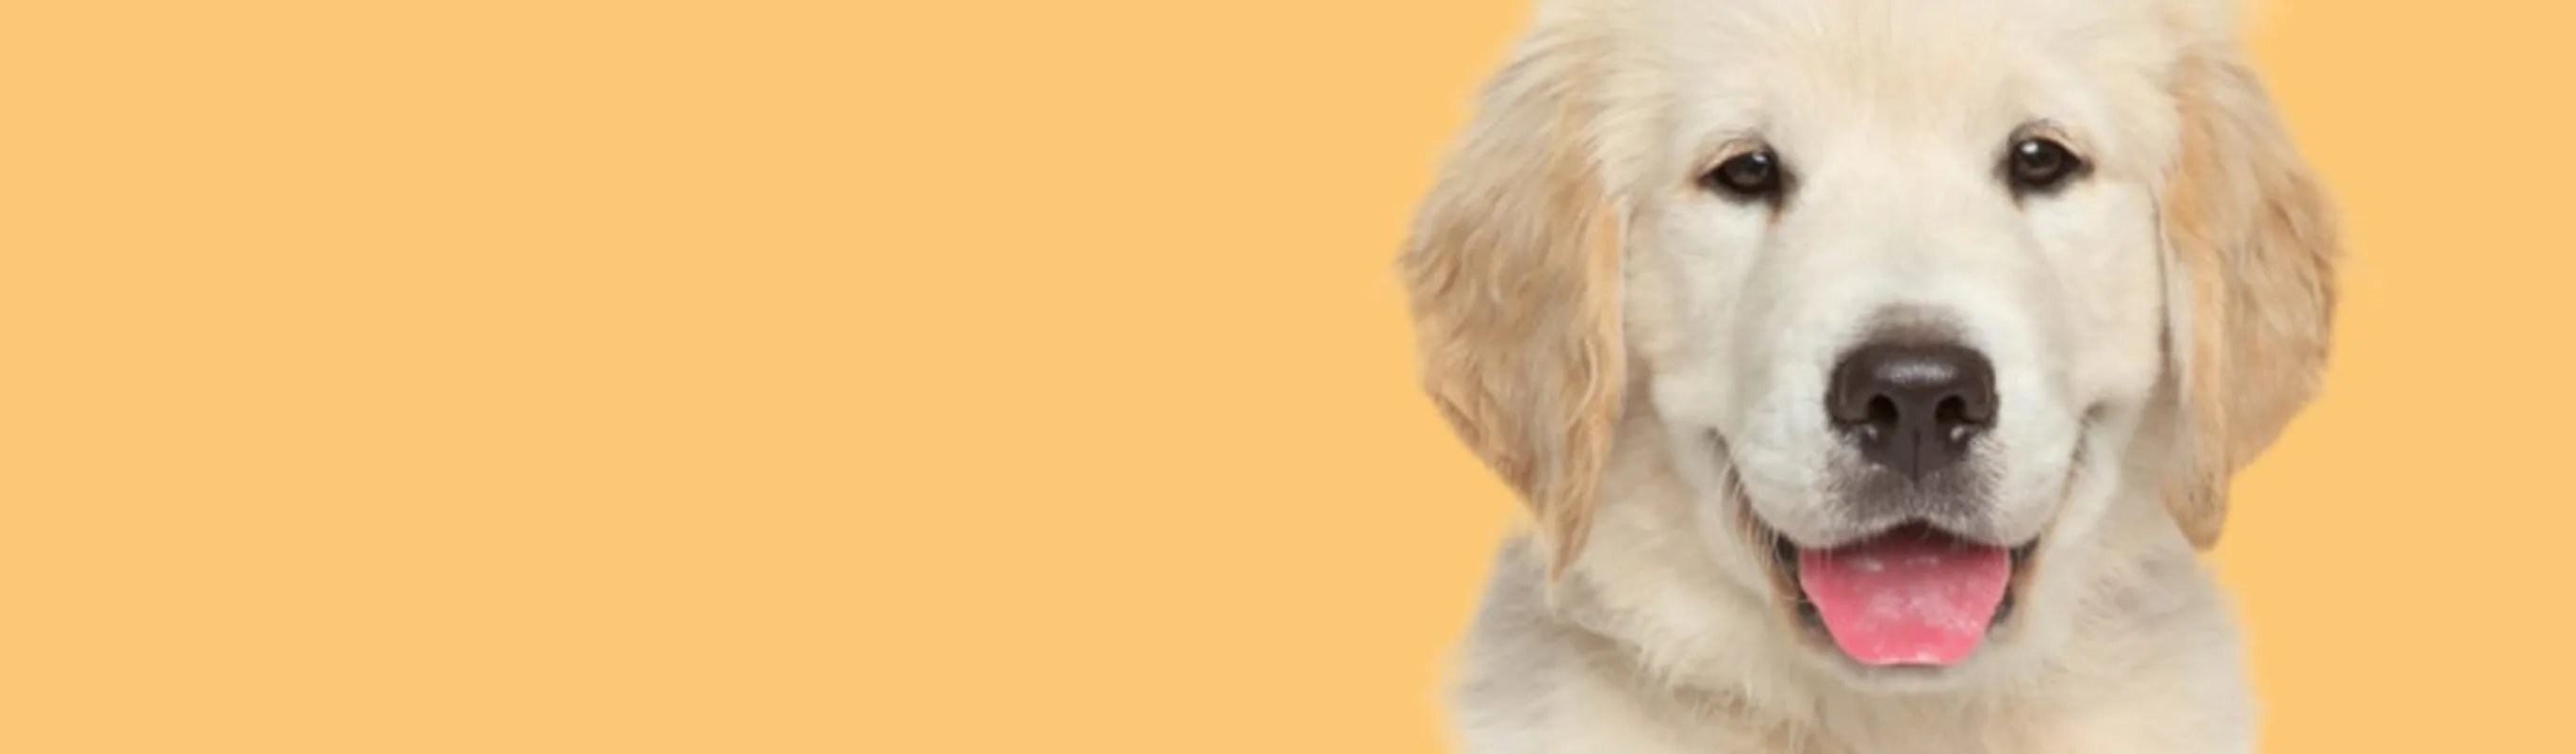 Golden puppy with its tongue out in front of a yellow/orange background 